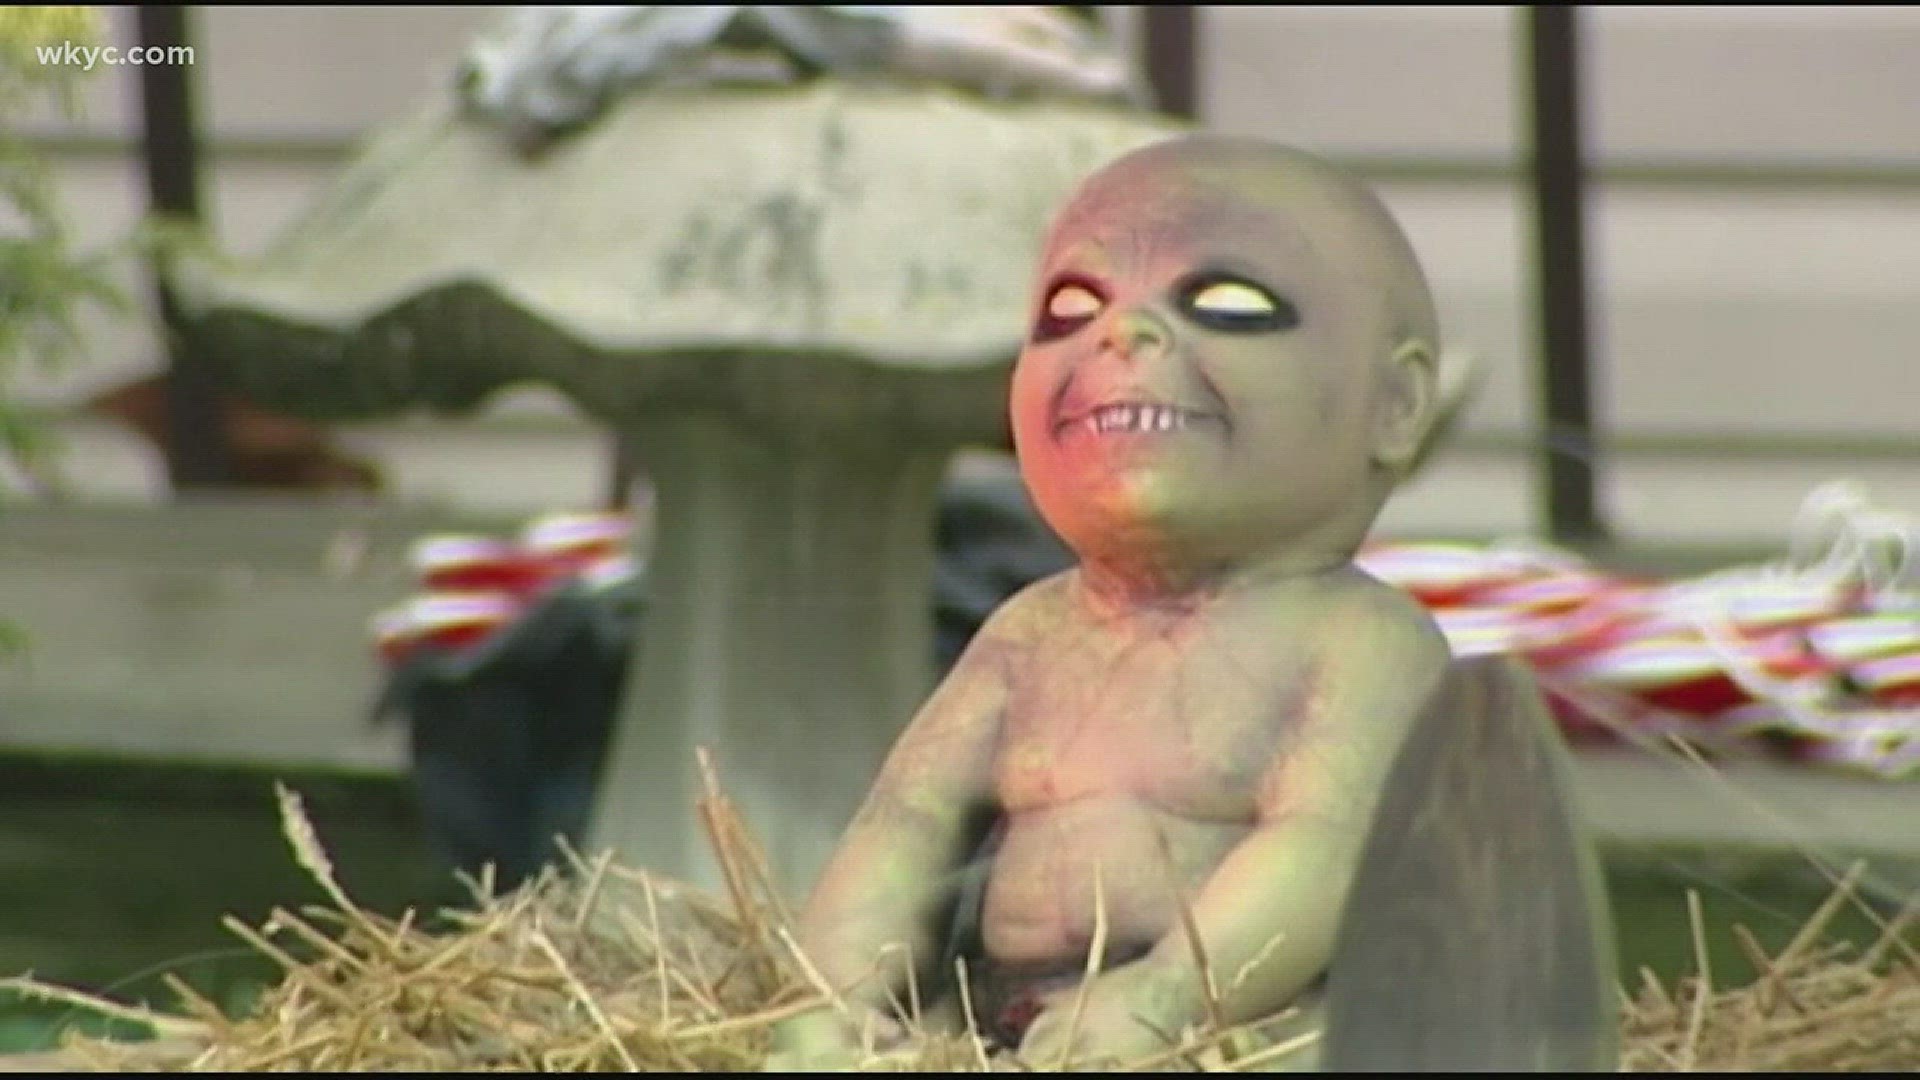 End of days comes for Ohio man's 'zombie Nativity' scene